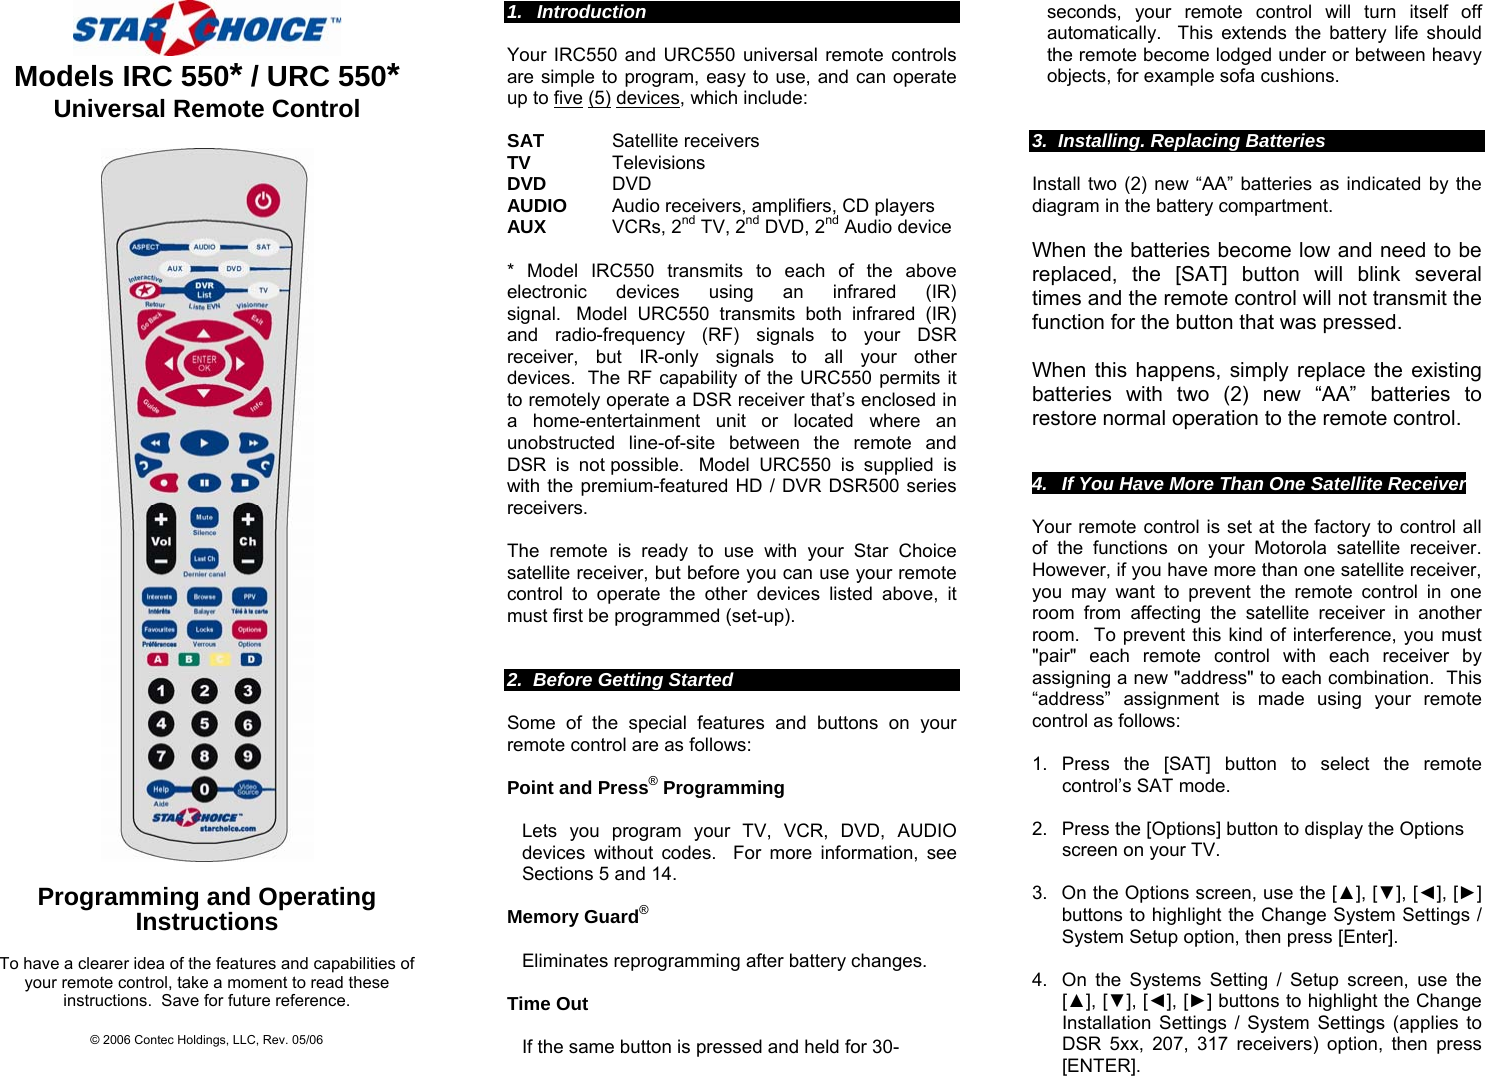    Models IRC 550* / URC 550* Universal Remote Control    Programming and Operating  Instructions  To have a clearer idea of the features and capabilities of your remote control, take a moment to read these instructions.  Save for future reference.  © 2006 Contec Holdings, LLC, Rev. 05/06  1. Introduction                                                                                                                                Your IRC550 and URC550 universal remote controls are simple to program, easy to use, and can operate up to five (5) devices, which include:   SAT      Satellite receivers TV       Televisions DVD     DVD AUDIO      Audio receivers, amplifiers, CD players AUX     VCRs, 2nd TV, 2nd DVD, 2nd Audio device  * Model IRC550 transmits to each of the above electronic devices using an infrared (IR) signal.  Model URC550 transmits both infrared (IR) and radio-frequency (RF) signals to your DSR receiver, but IR-only signals to all your other devices.  The RF capability of the URC550 permits it to remotely operate a DSR receiver that’s enclosed in a home-entertainment unit or located where an unobstructed line-of-site between the remote and DSR is not possible.  Model URC550 is supplied is with the premium-featured HD / DVR DSR500 series receivers.  The remote is ready to use with your Star Choice satellite receiver, but before you can use your remote control to operate the other devices listed above, it must first be programmed (set-up).                                                                          2.  Before Getting Started  Some of the special features and buttons on your remote control are as follows:  Point and Press® Programming  Lets you program your TV, VCR, DVD, AUDIO devices without codes.  For more information, see Sections 5 and 14.   Memory Guard®    Eliminates reprogramming after battery changes.  Time Out   If the same button is pressed and held for 30-  seconds, your remote control will turn itself off automatically.  This extends the battery life should the remote become lodged under or between heavy objects, for example sofa cushions.   3.  Installing. Replacing Batteries  Install two (2) new “AA” batteries as indicated by the diagram in the battery compartment.    When the batteries become low and need to be replaced, the [SAT] button will blink several times and the remote control will not transmit the function for the button that was pressed.    When this happens, simply replace the existing batteries with two (2) new “AA” batteries to restore normal operation to the remote control.   4.  If You Have More Than One Satellite Receiver  Your remote control is set at the factory to control all of the functions on your Motorola satellite receiver.  However, if you have more than one satellite receiver, you may want to prevent the remote control in one room from affecting the satellite receiver in another room.  To prevent this kind of interference, you must &quot;pair&quot; each remote control with each receiver by assigning a new &quot;address&quot; to each combination.  This “address” assignment is made using your remote control as follows:  1. Press the [SAT] button to select the remote control’s SAT mode.  2.  Press the [Options] button to display the Options    screen on your TV.  3.  On the Options screen, use the [▲], [▼], [◄], [►] buttons to highlight the Change System Settings / System Setup option, then press [Enter].  4.  On the Systems Setting / Setup screen, use the [▲], [▼], [◄], [►] buttons to highlight the Change Installation Settings / System Settings (applies to DSR 5xx, 207, 317 receivers) option, then press [ENTER]. 